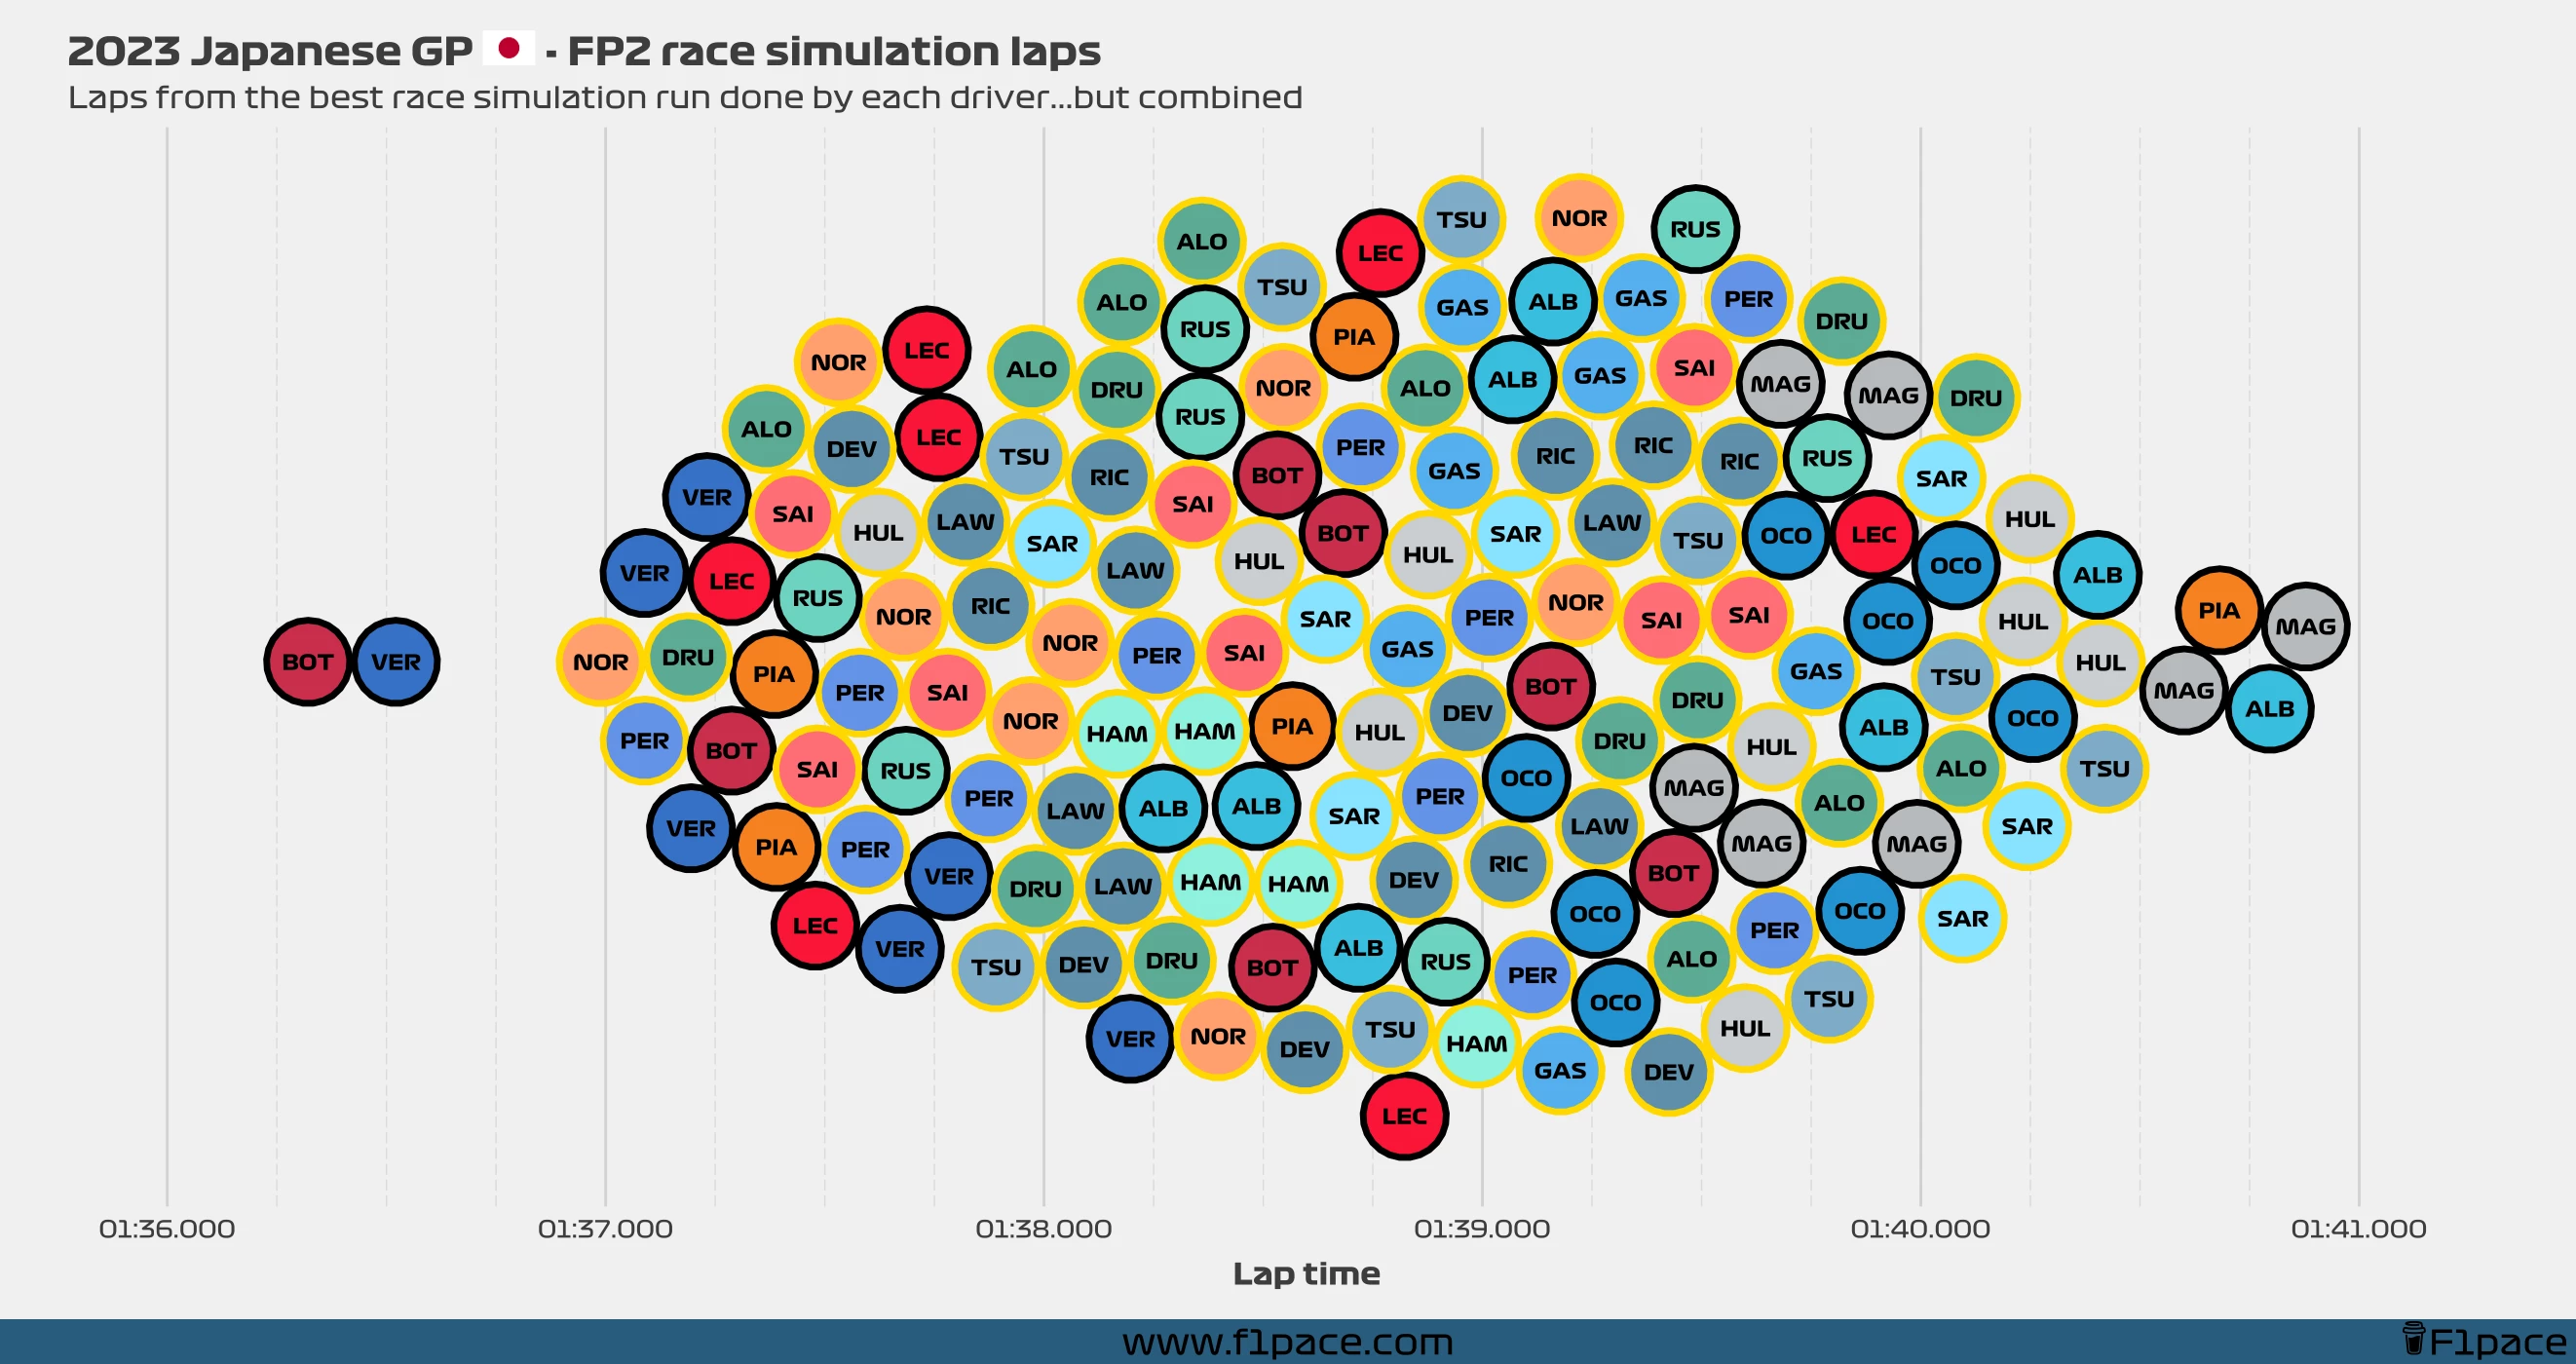 Race simulation laps: All the laps!